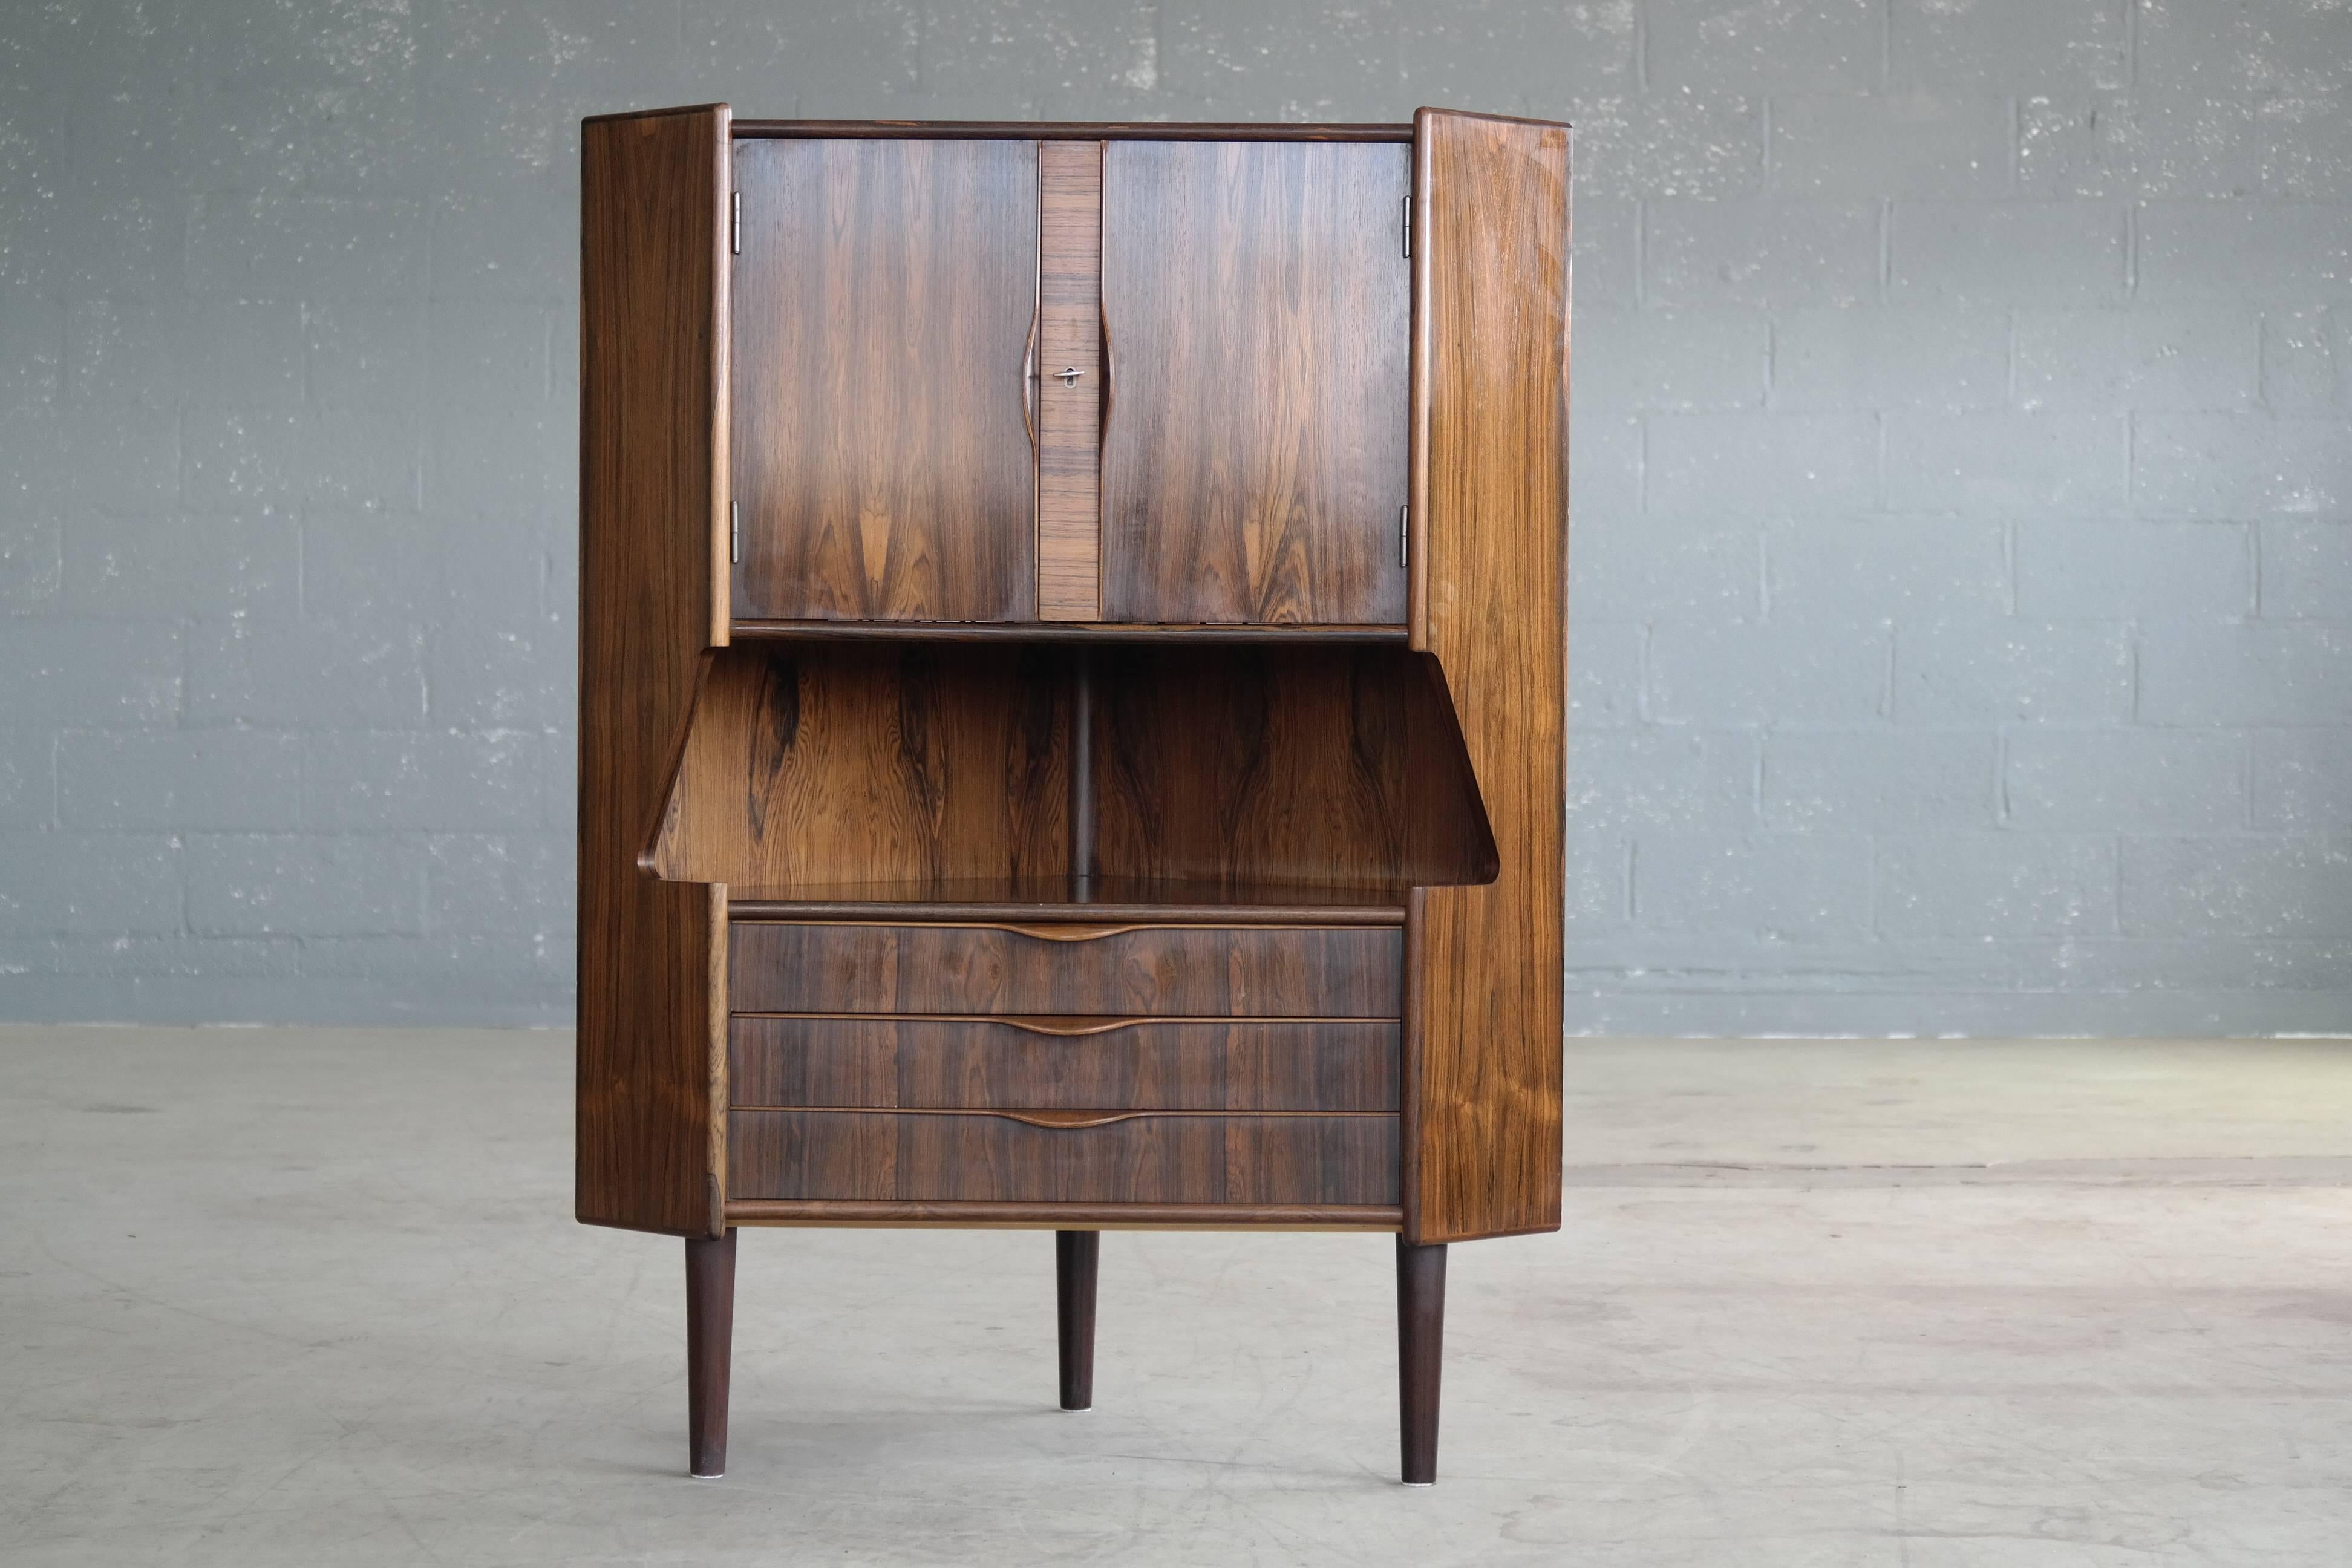 Fantastic corner cabinet and dry bar by Gunni Omann made in Rio Palisander with a beautiful deep color and grain. The top features a cocktail bar behind two doors with three storage drawers below. Great storage for bottles and glassware for home or